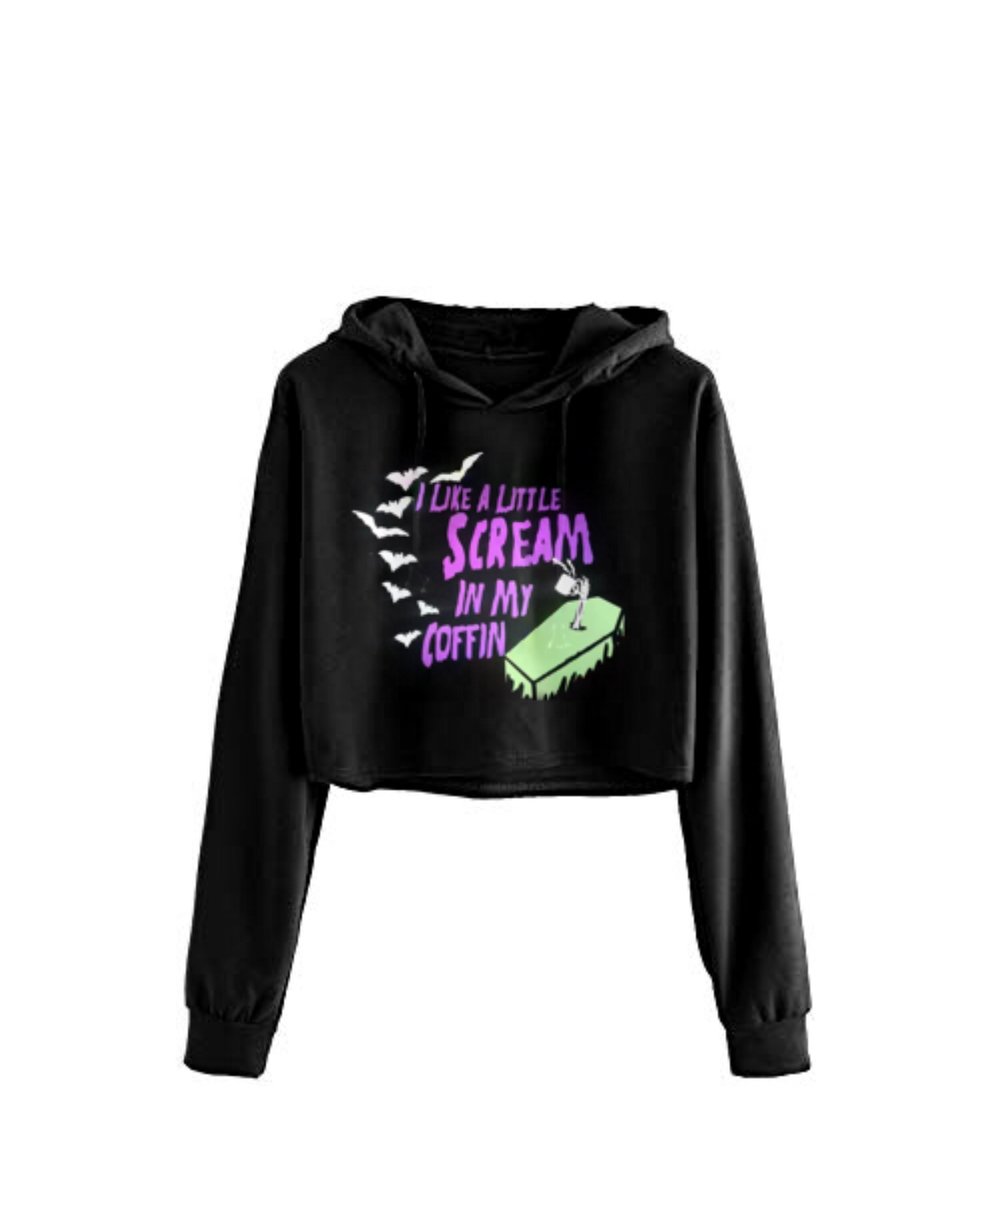 Scream In My Coffin Cropped Hoodie